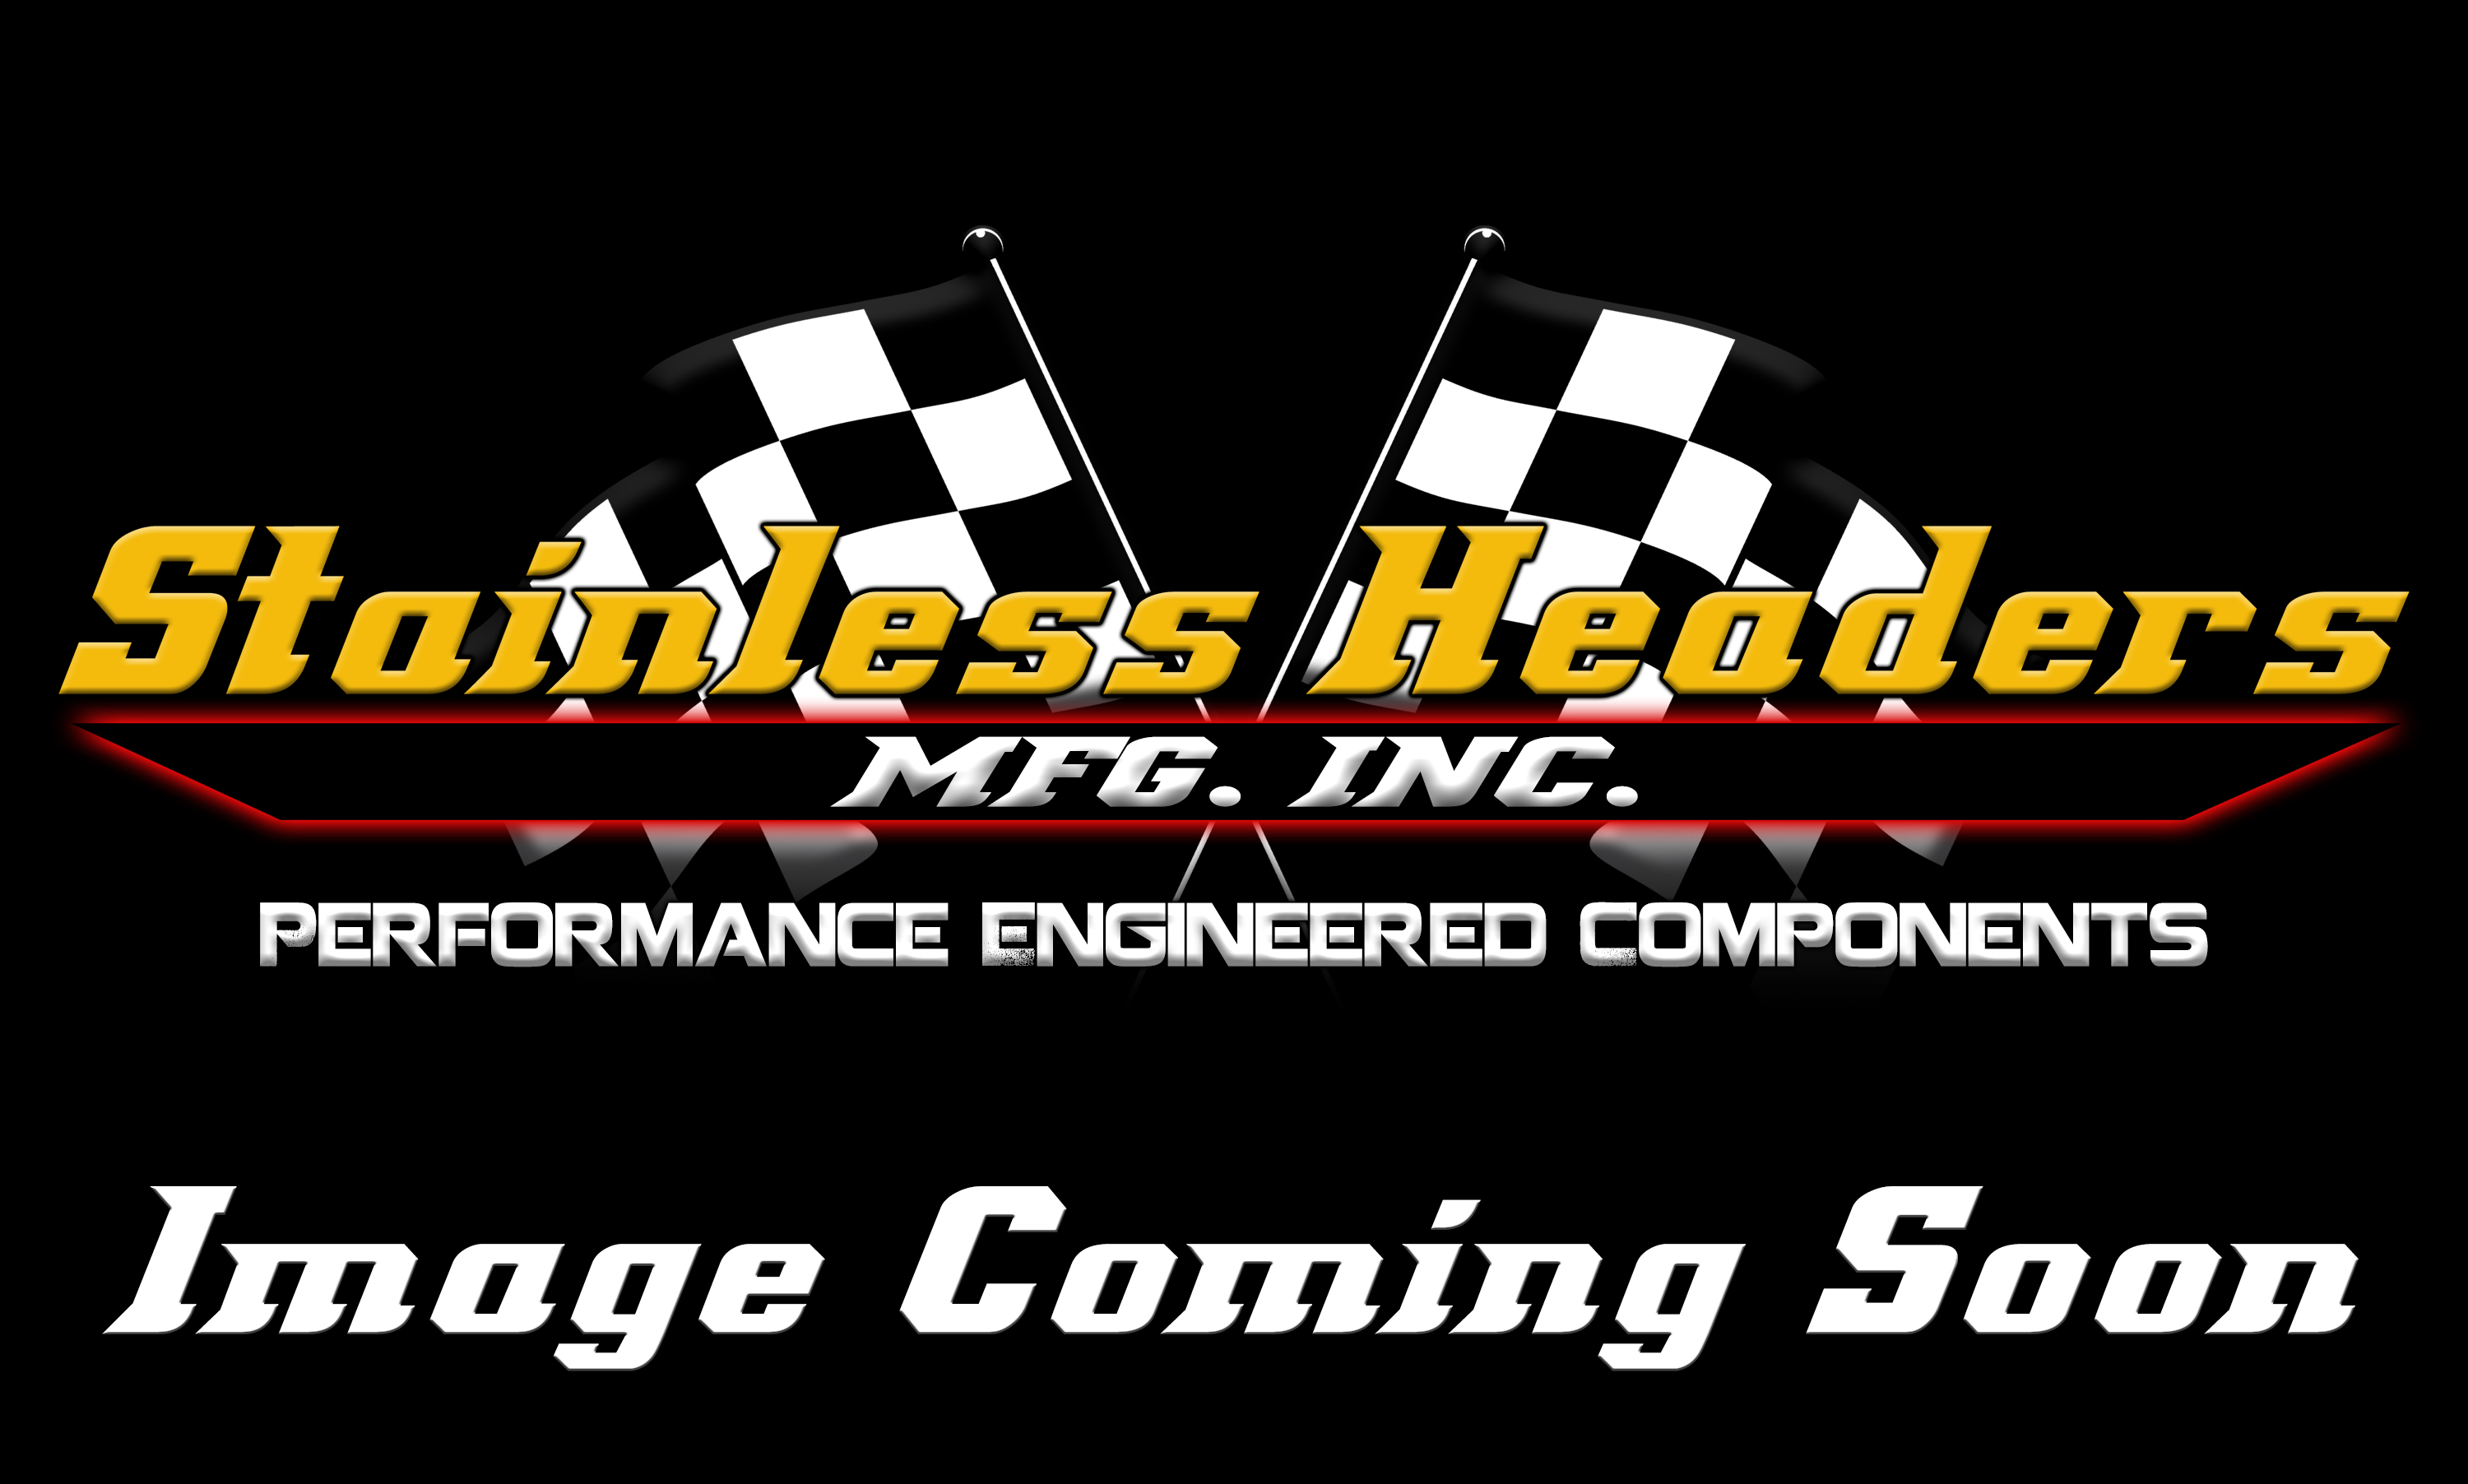 Stainless Headers - 1 3/4" Primary 5 into 1 Performance Merge Collector-16ga 304ss - Image 2